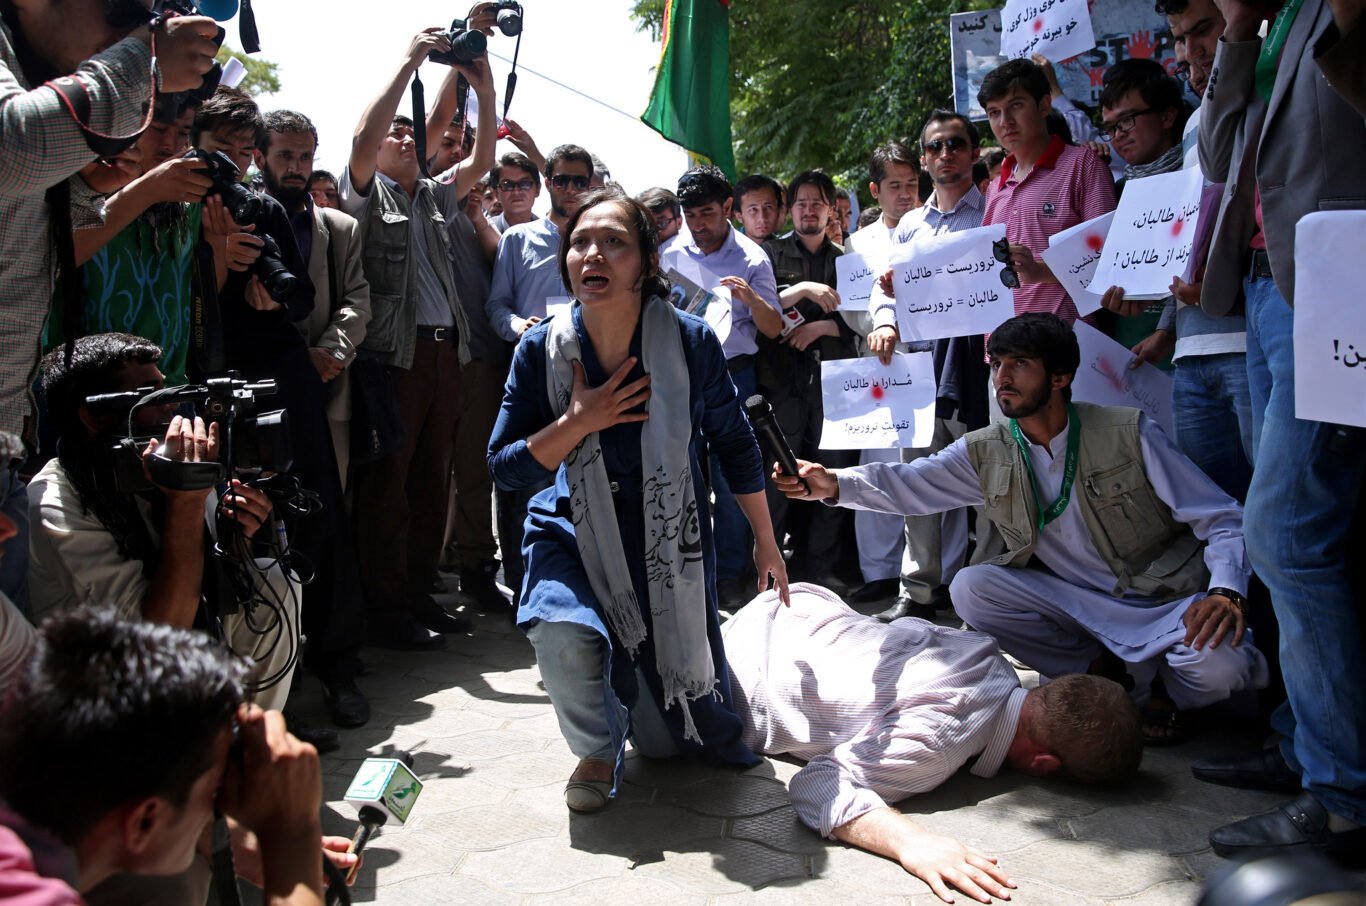 Afghan artists performs a show as members of civil society organizations participate in an anti-Taliban demonstration to rally against "civilians killing" during the holy month of Ramadan, in Kabul, Afghanistan.